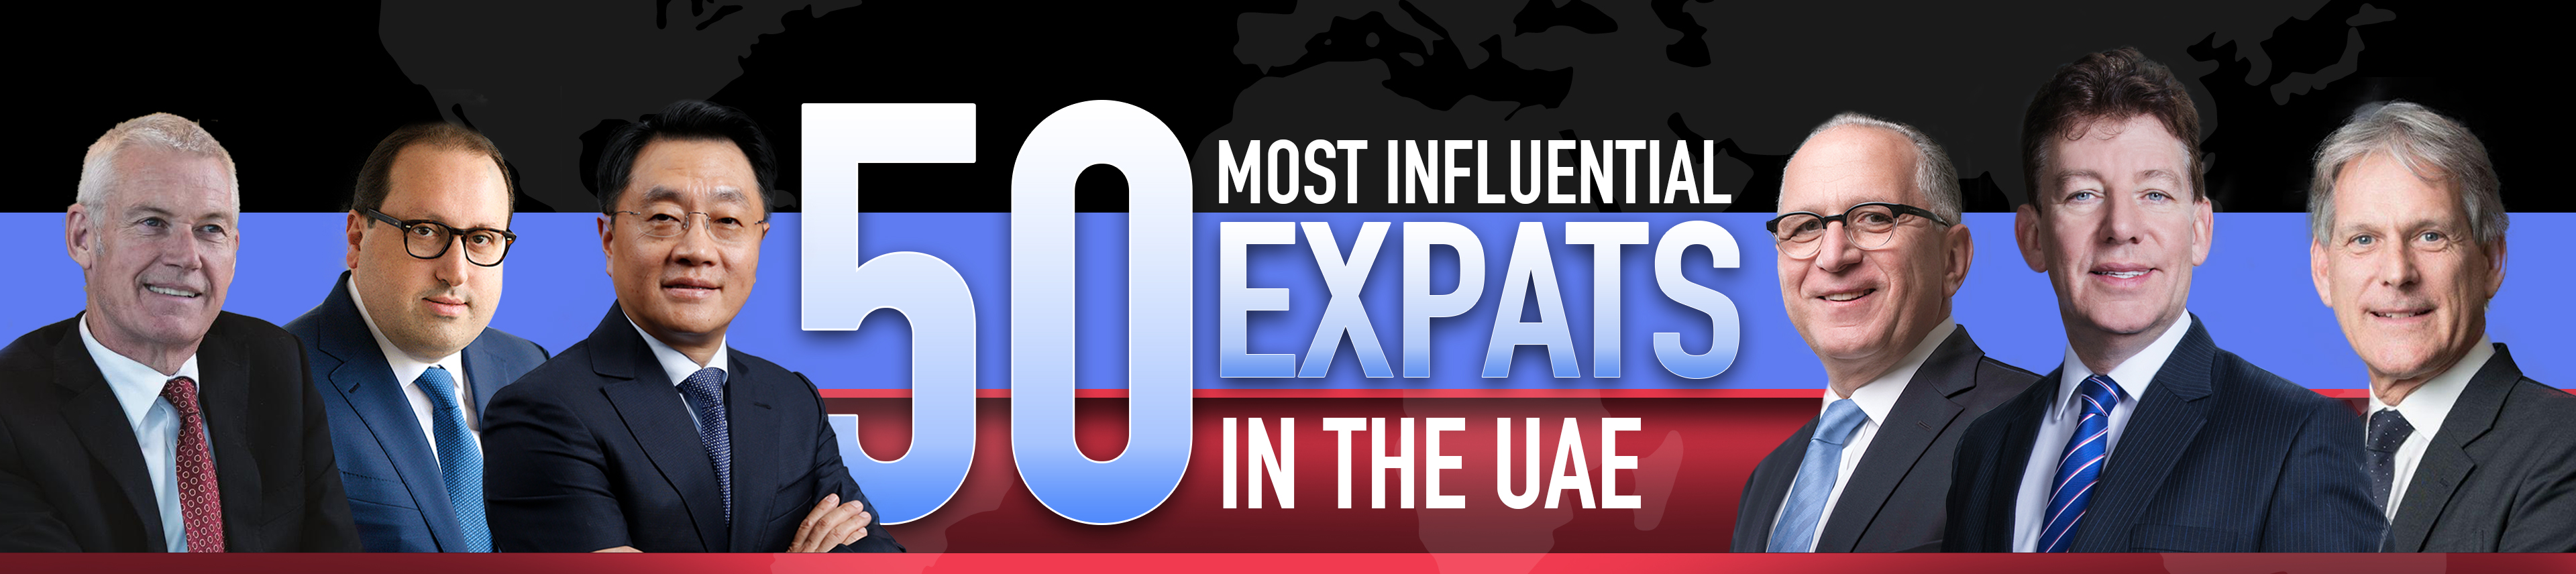 50 Most Influential Expats In The UAE